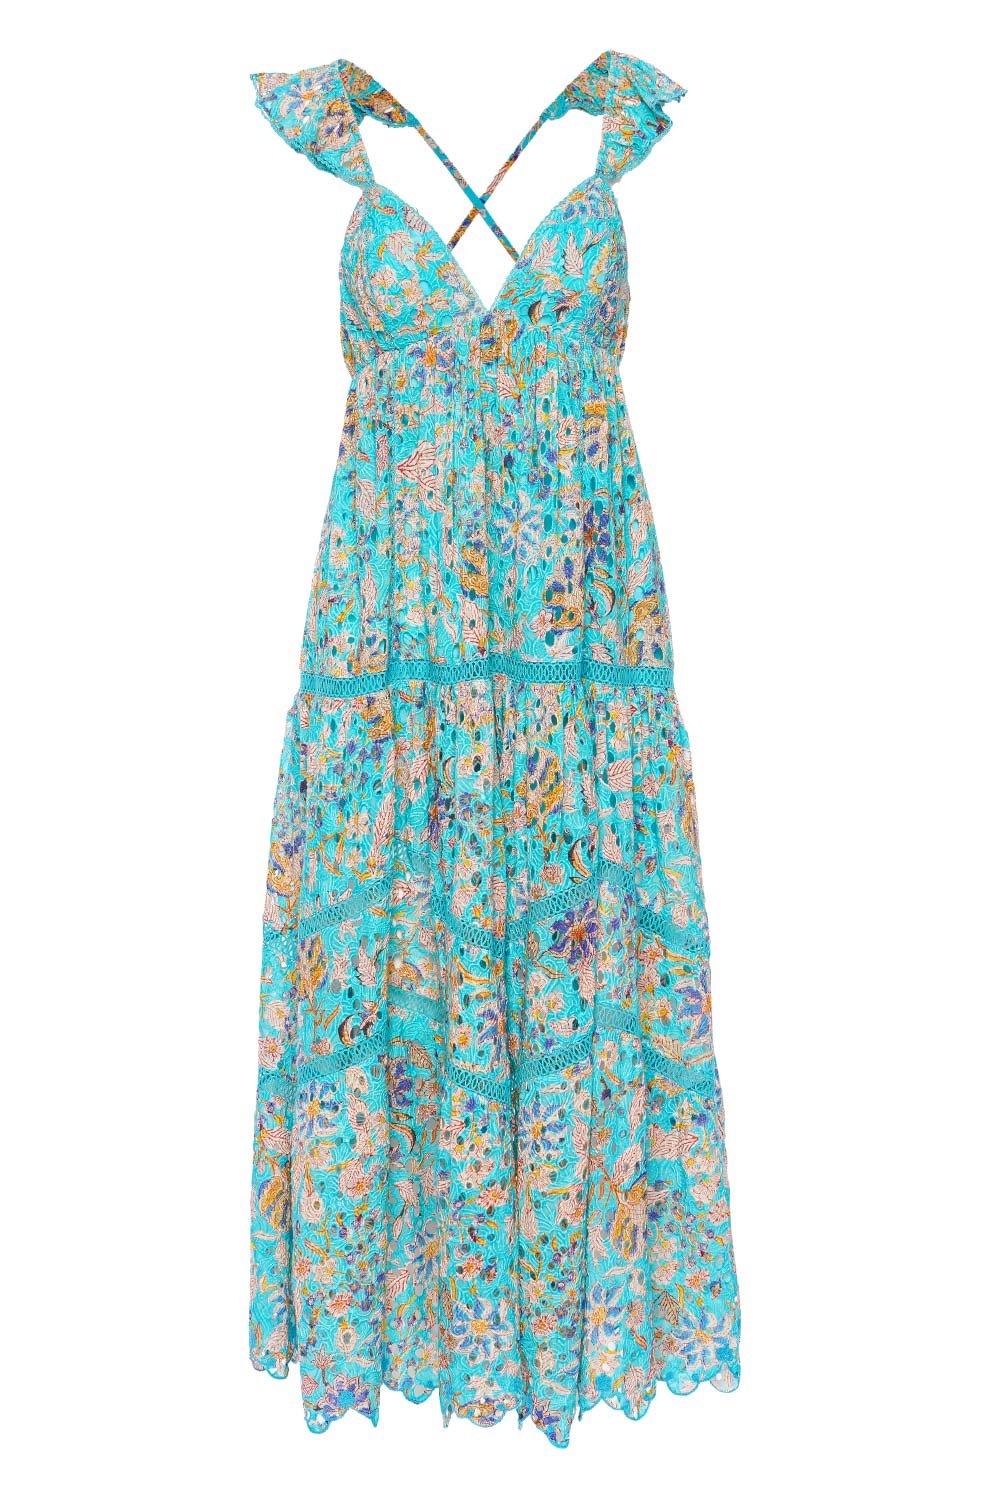 Hemant and Nandita Lyna Turquoise Blue Floral Maxi Dress